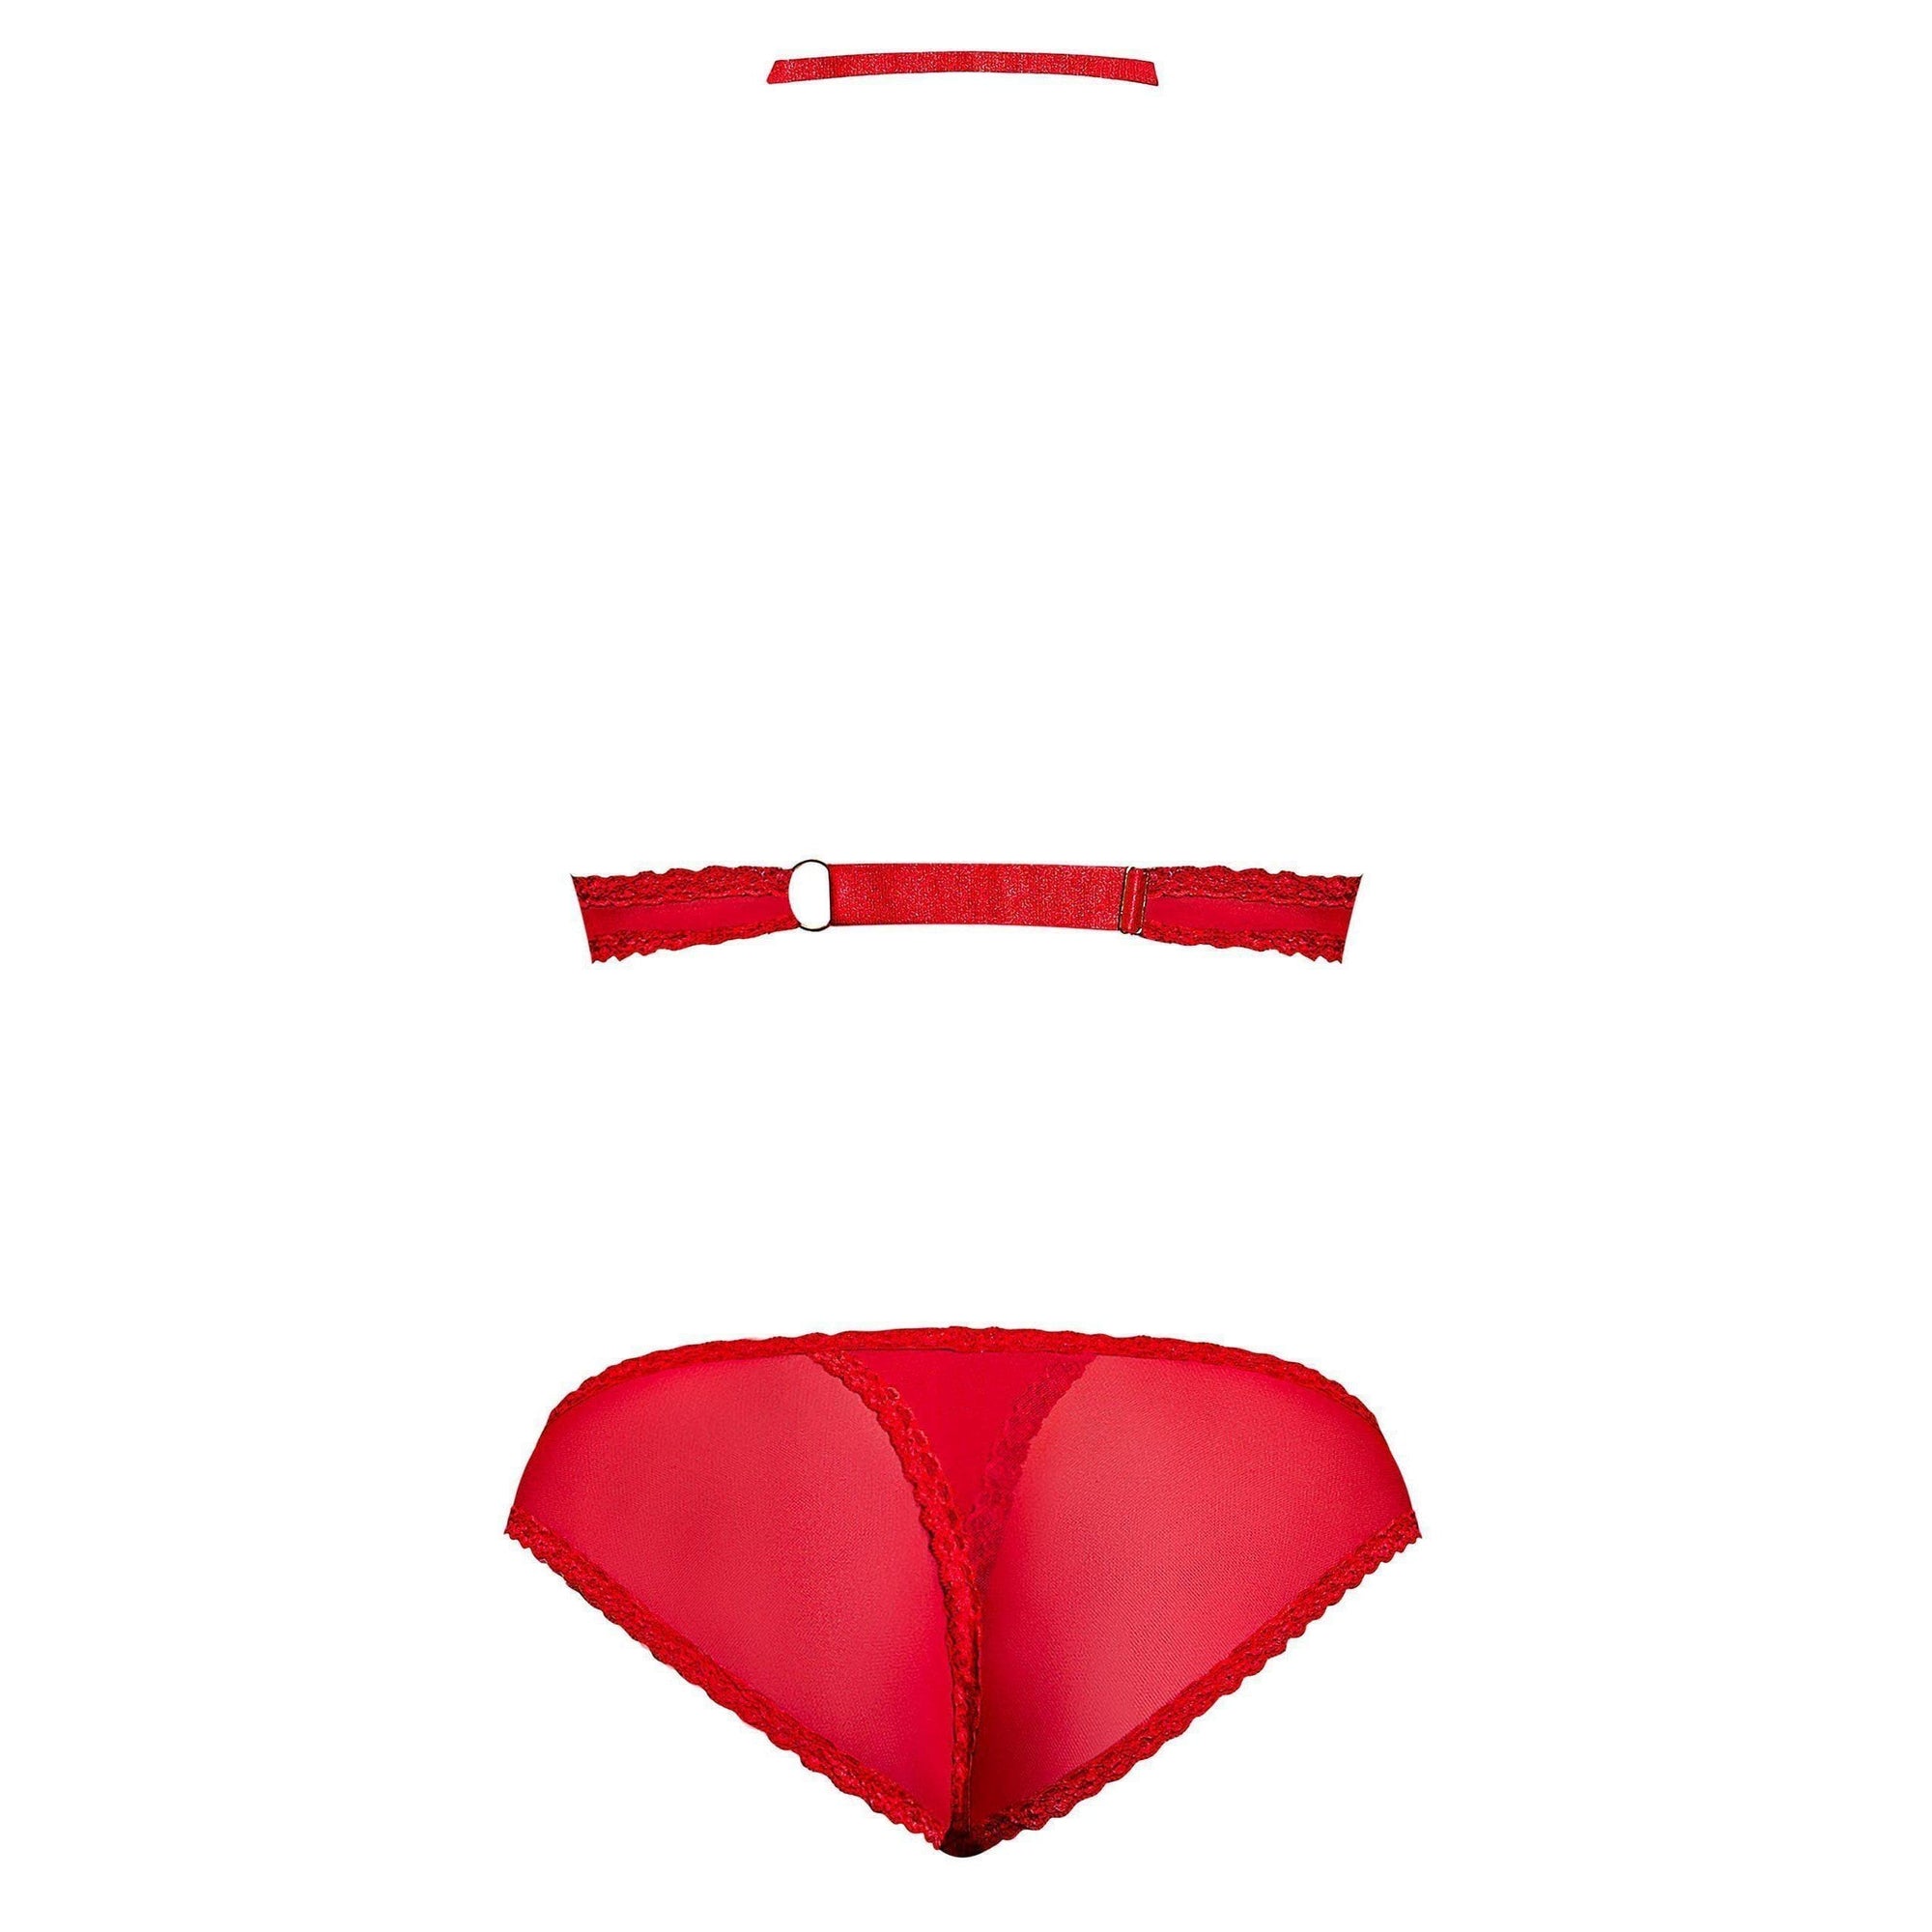 Magic Silk Risque Business Bra & Panty Red - Romantic Blessings